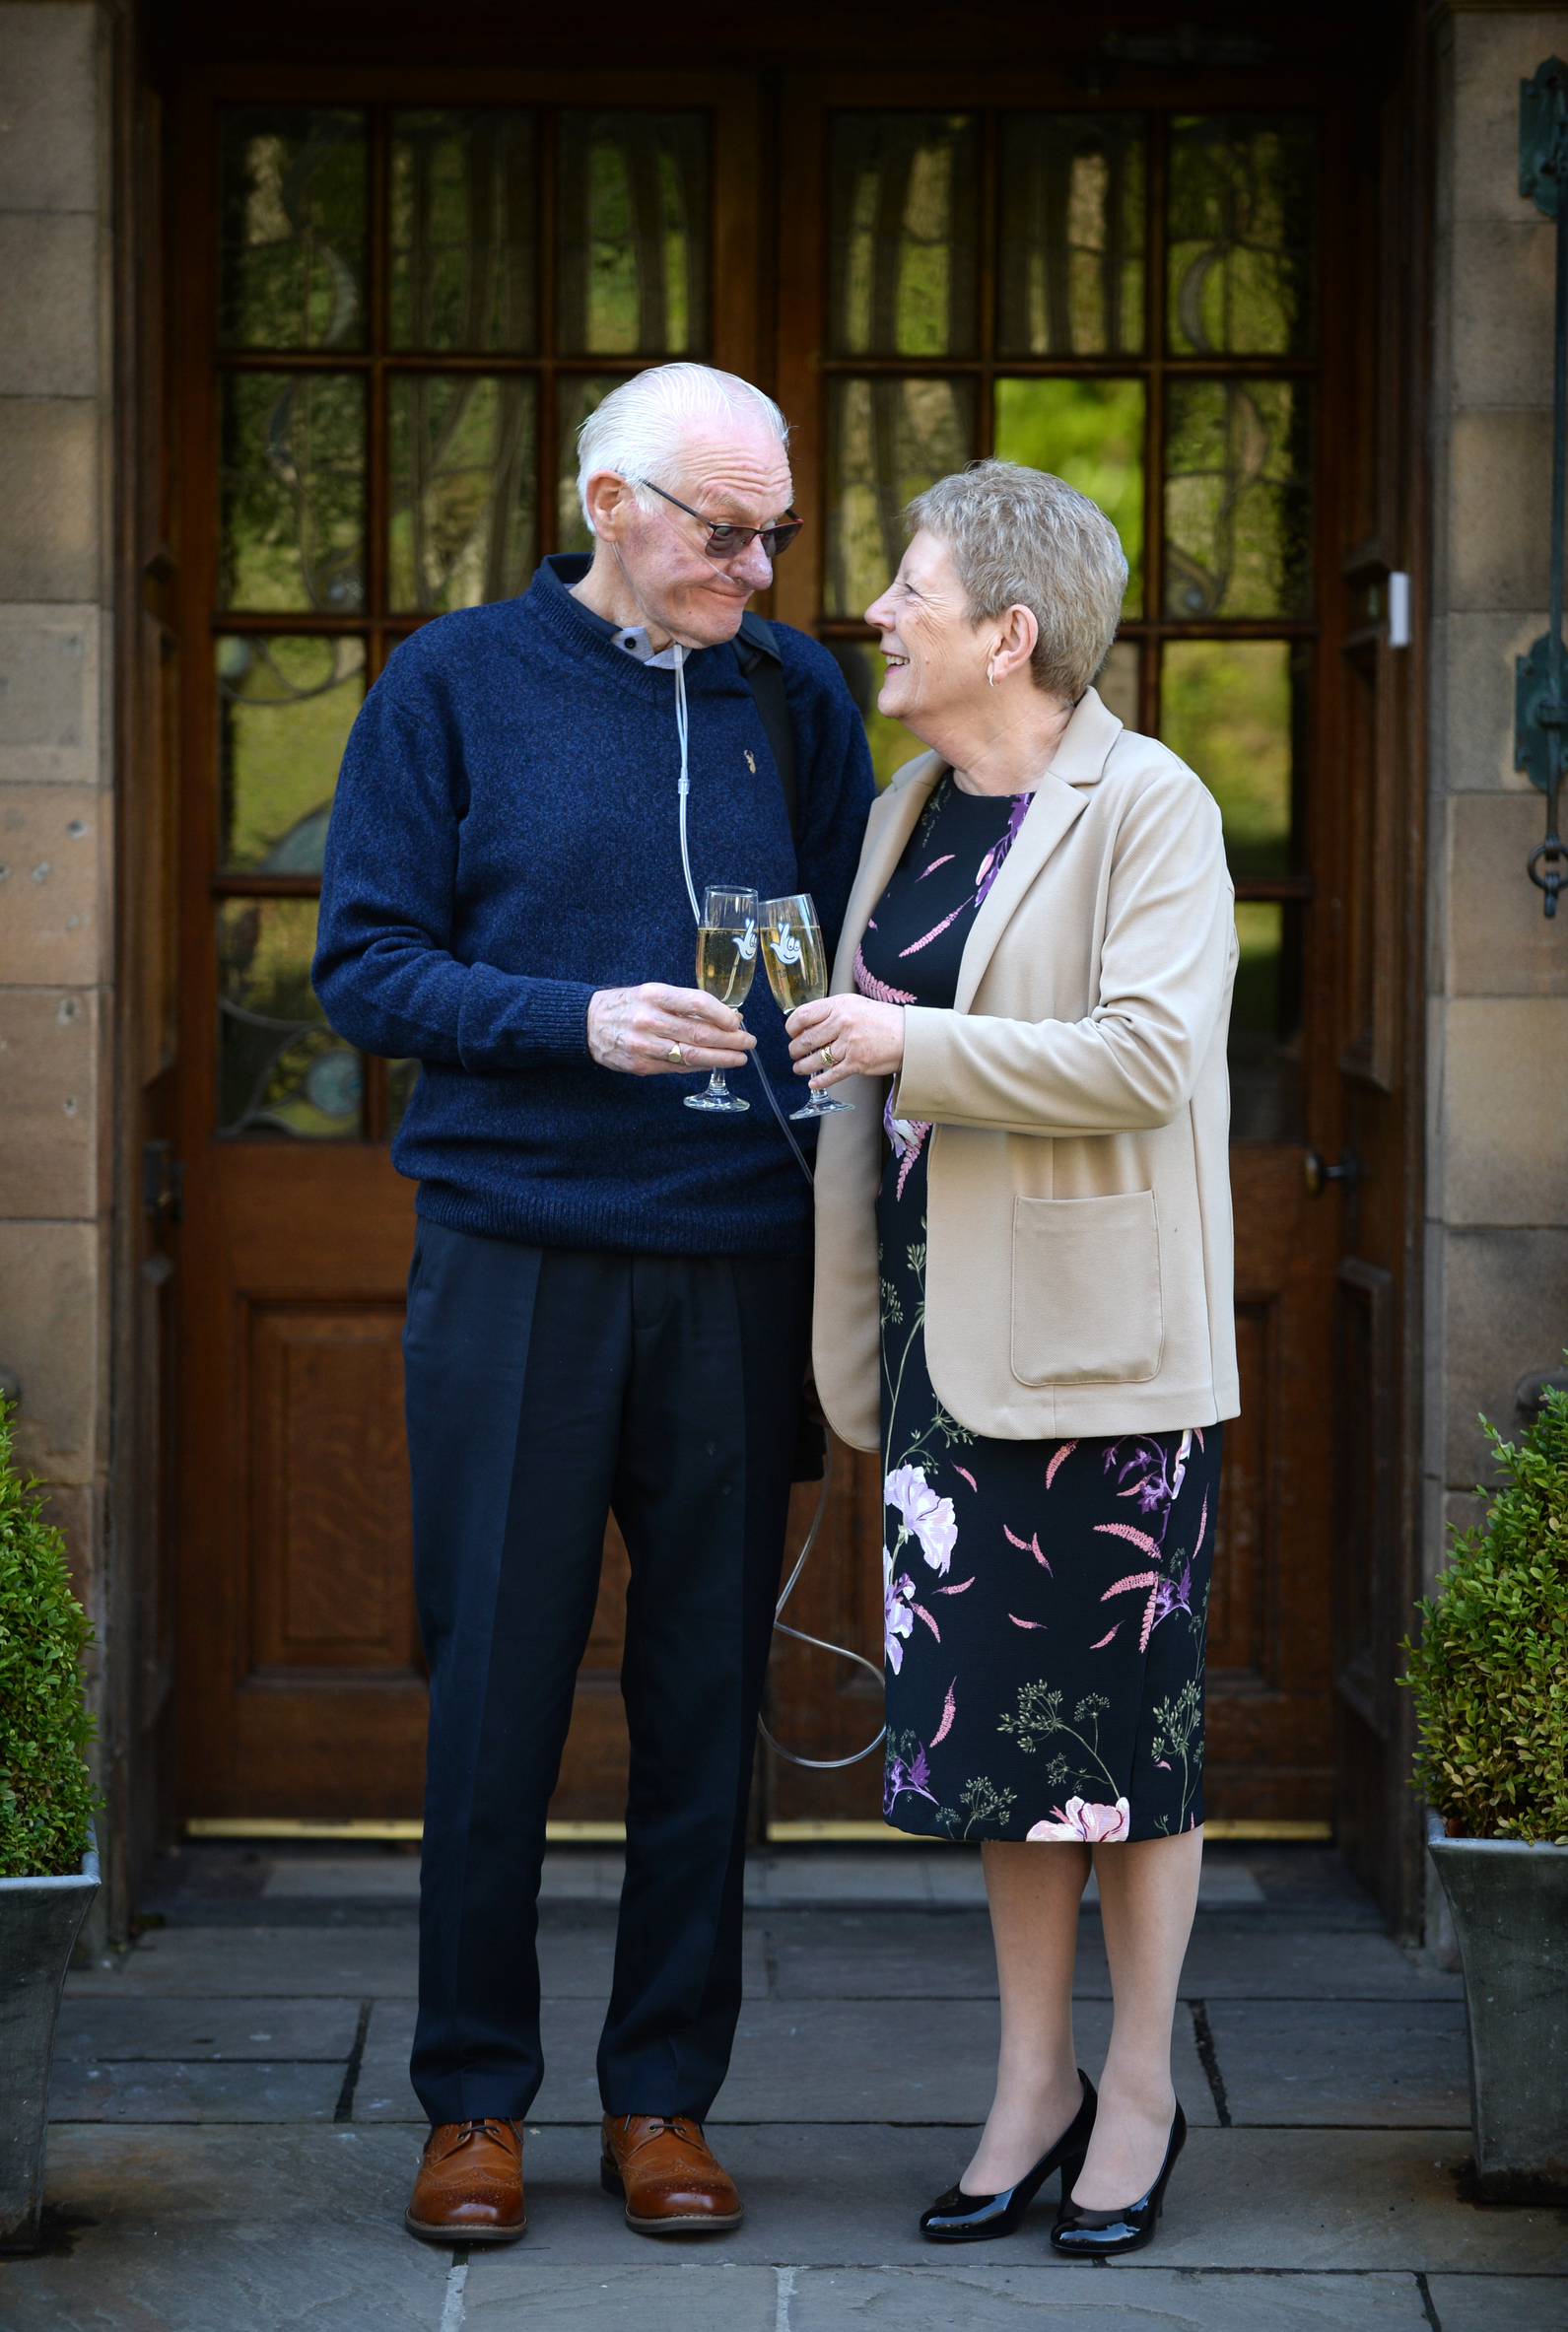 Ian and Marlyn Anderson toast their £1 million EuroMillions win.